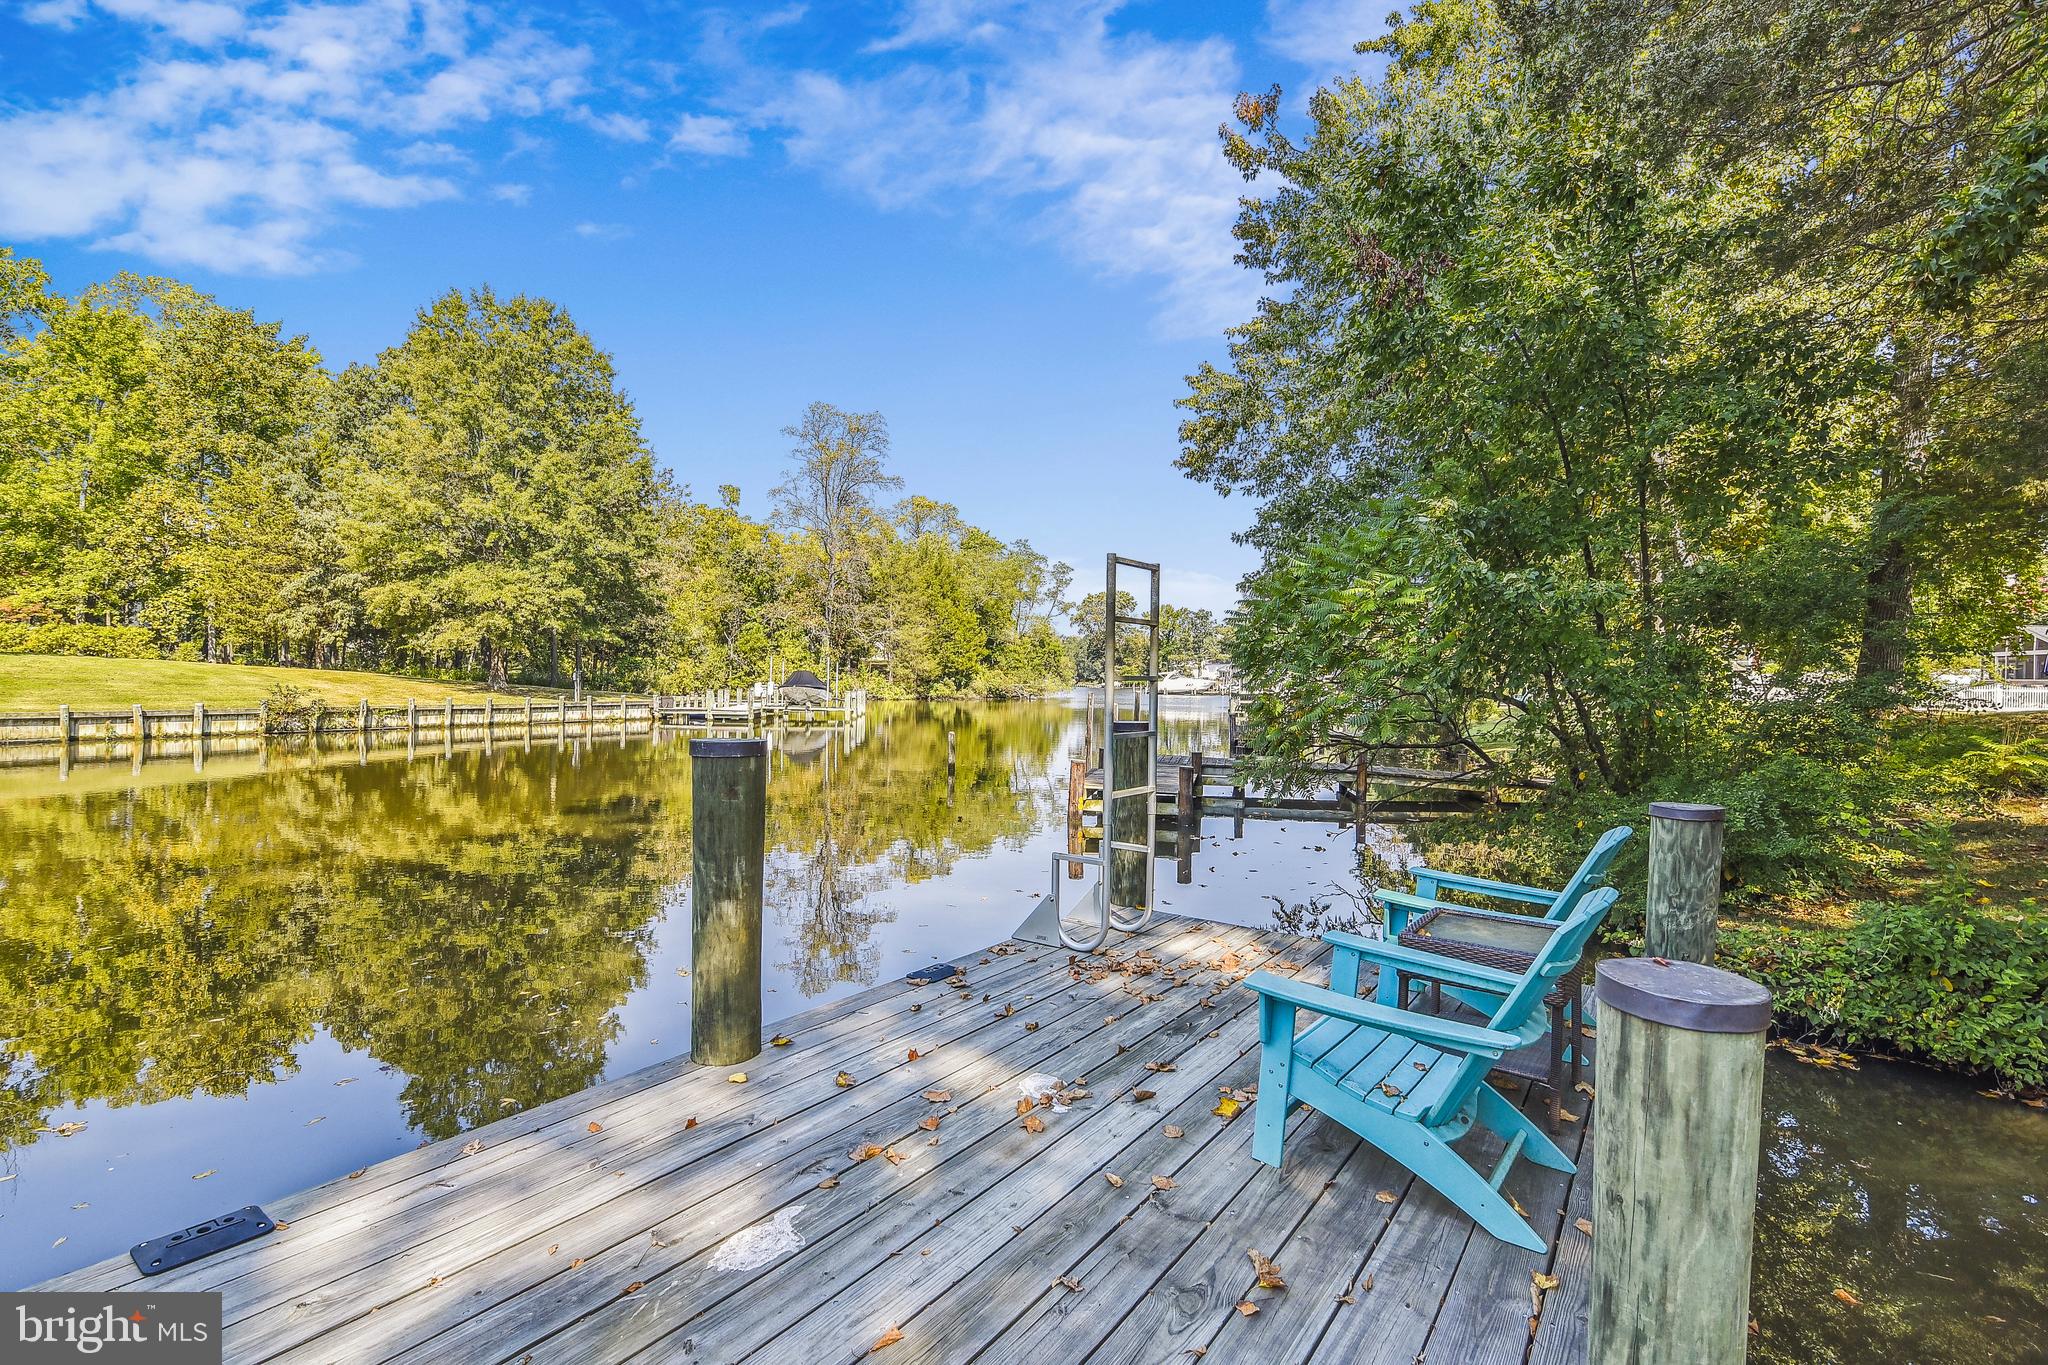 Discover waterfront living at its finest! This exquisite 3-bedroom, 2.5-bath Loch Haven Beach home b